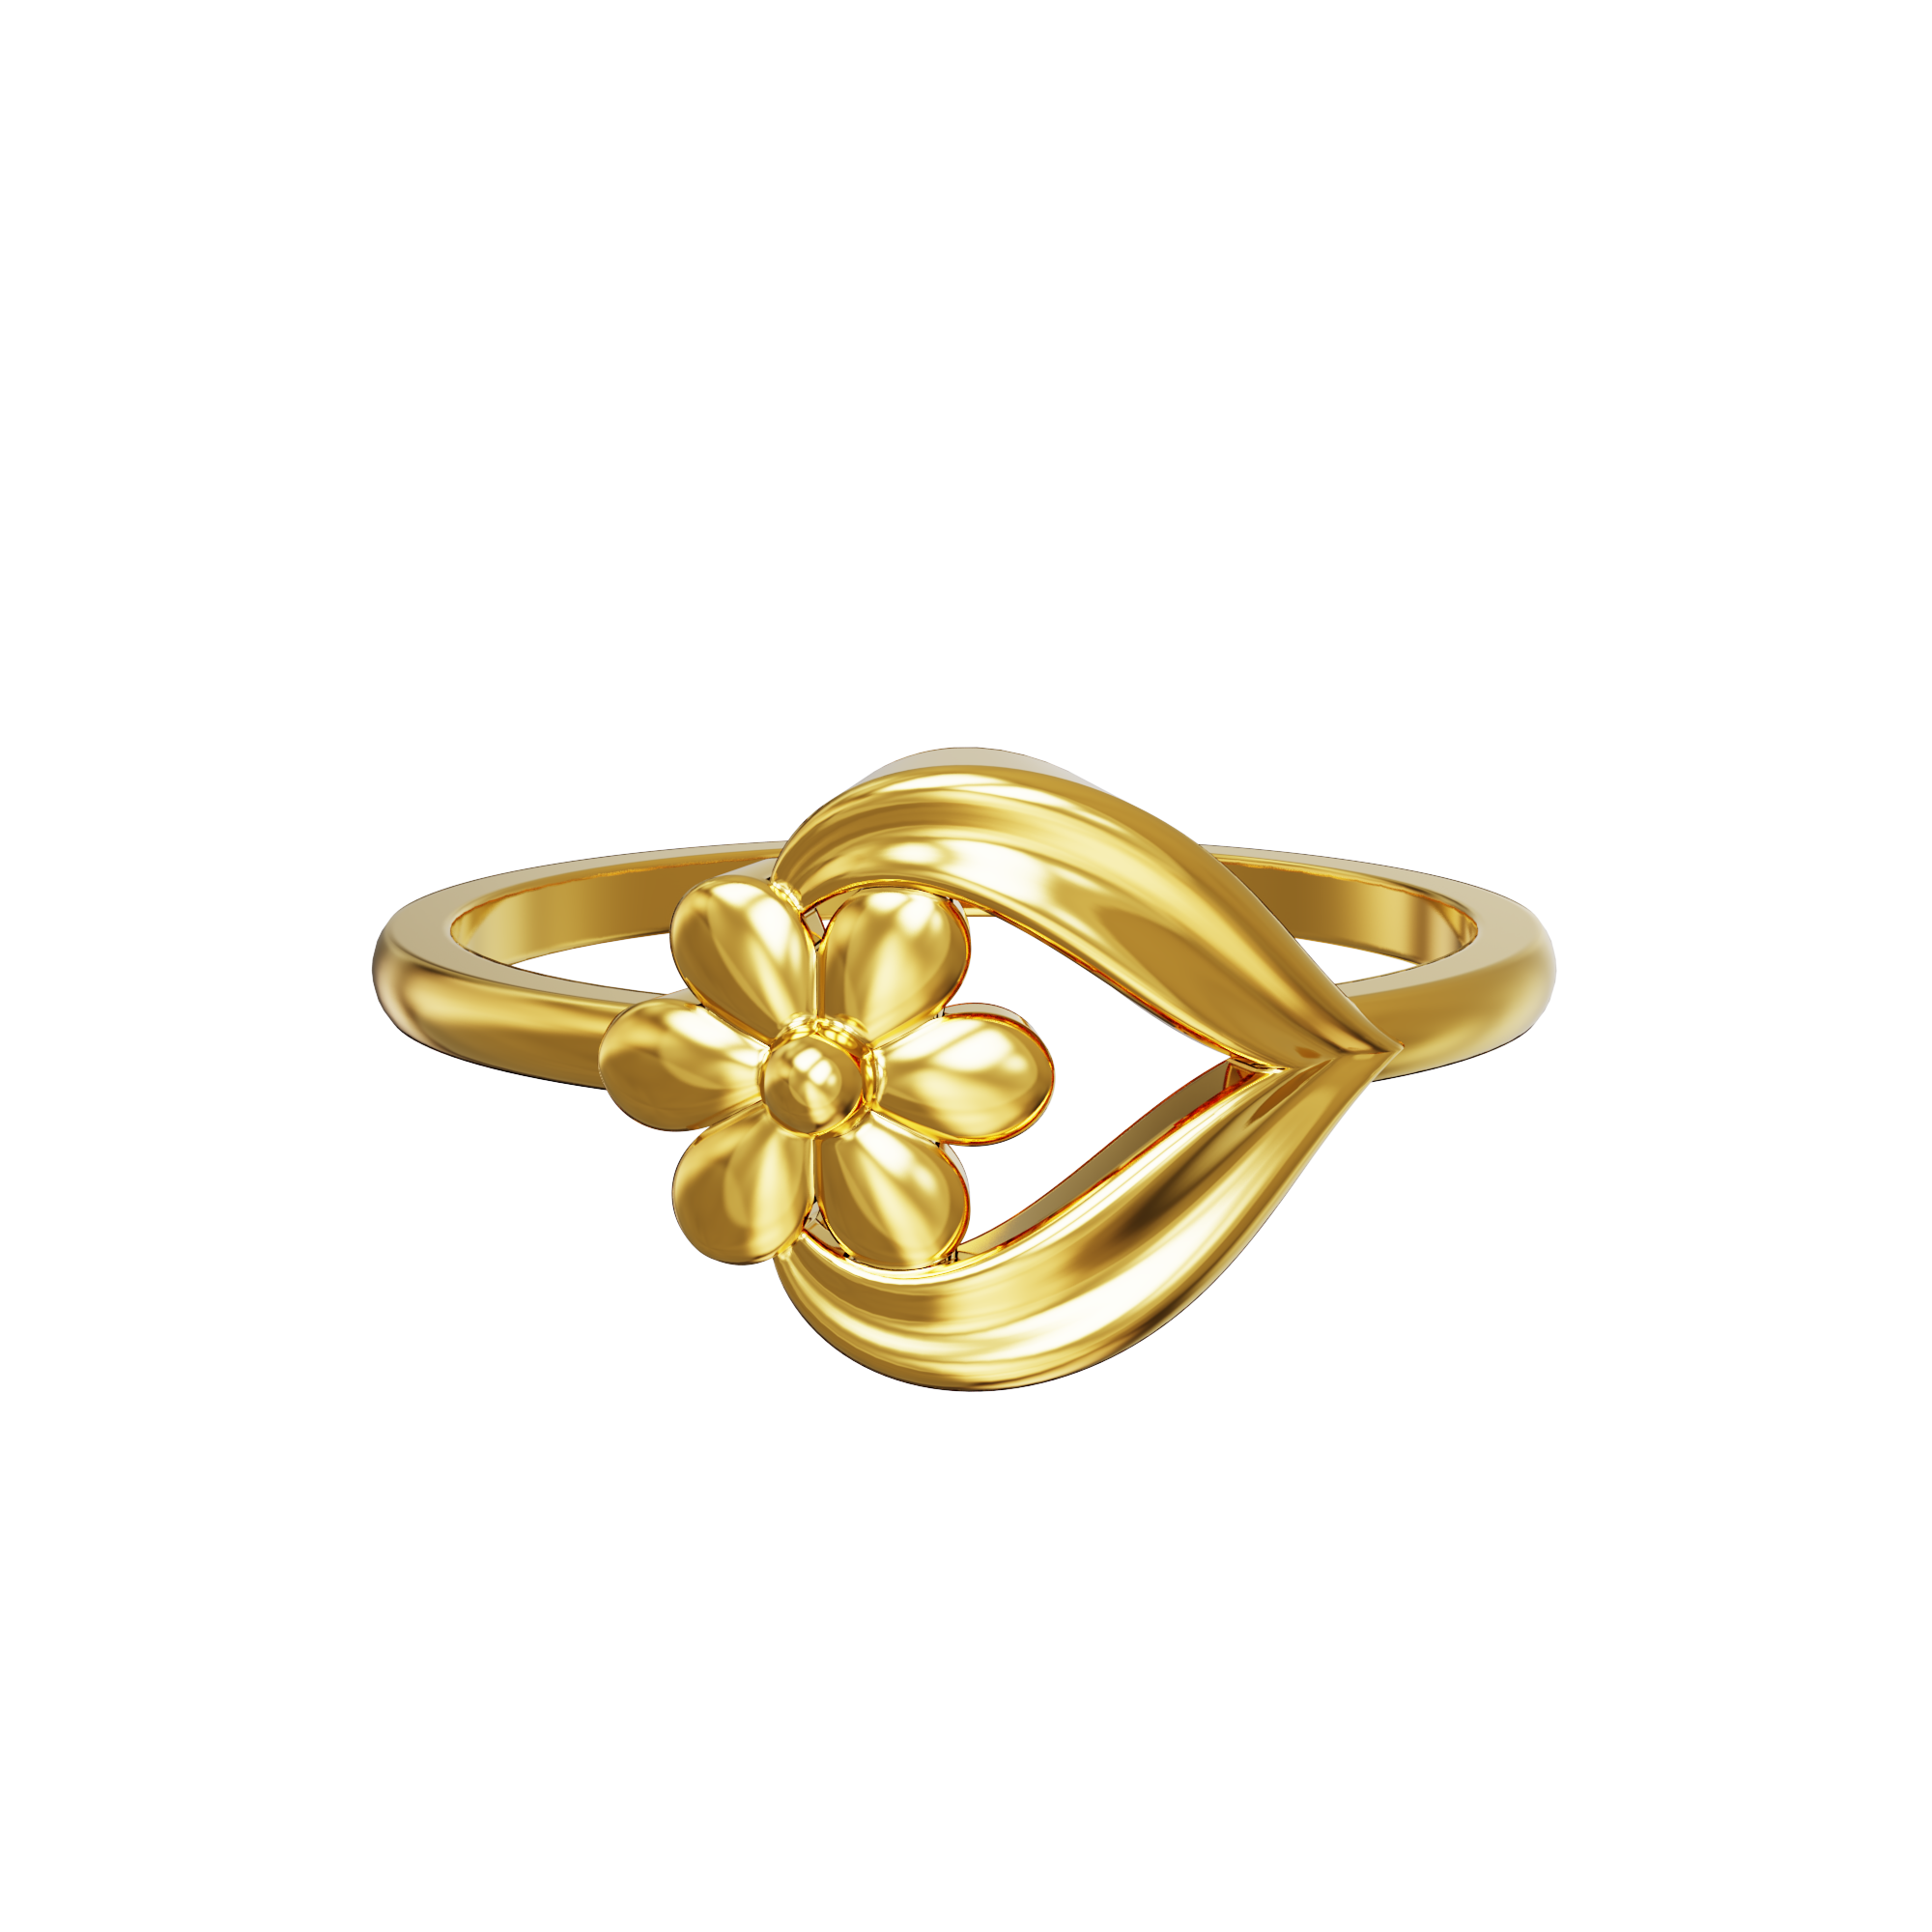 Gold Rings Online Shopping for Women at Low Prices